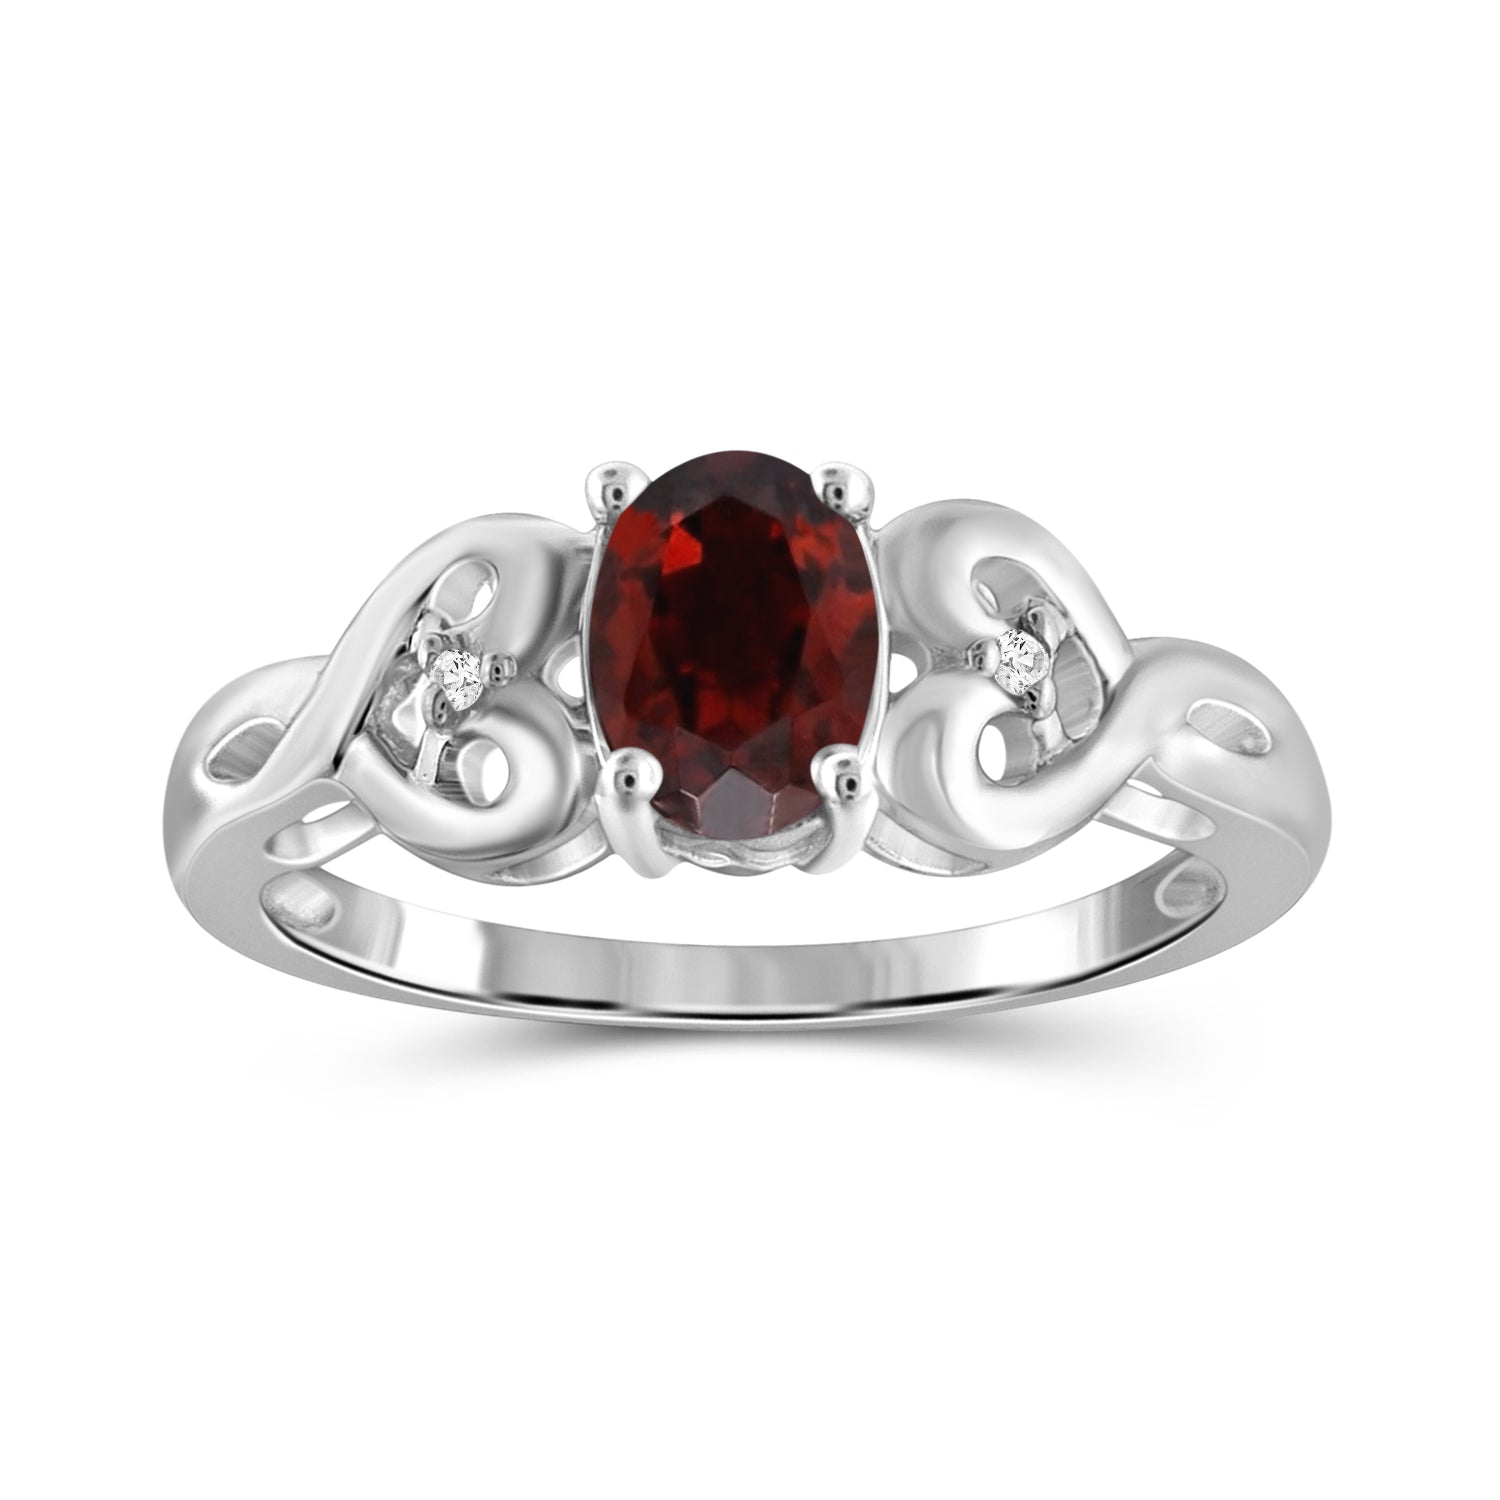 Garnet Ring Birthstone Jewelry – 1.00 Carat Garnet 0.925 Sterling Silver Ring Jewelry with White Diamond Accent – Gemstone Rings with Hypoallergenic 0.925 Sterling Silver Band